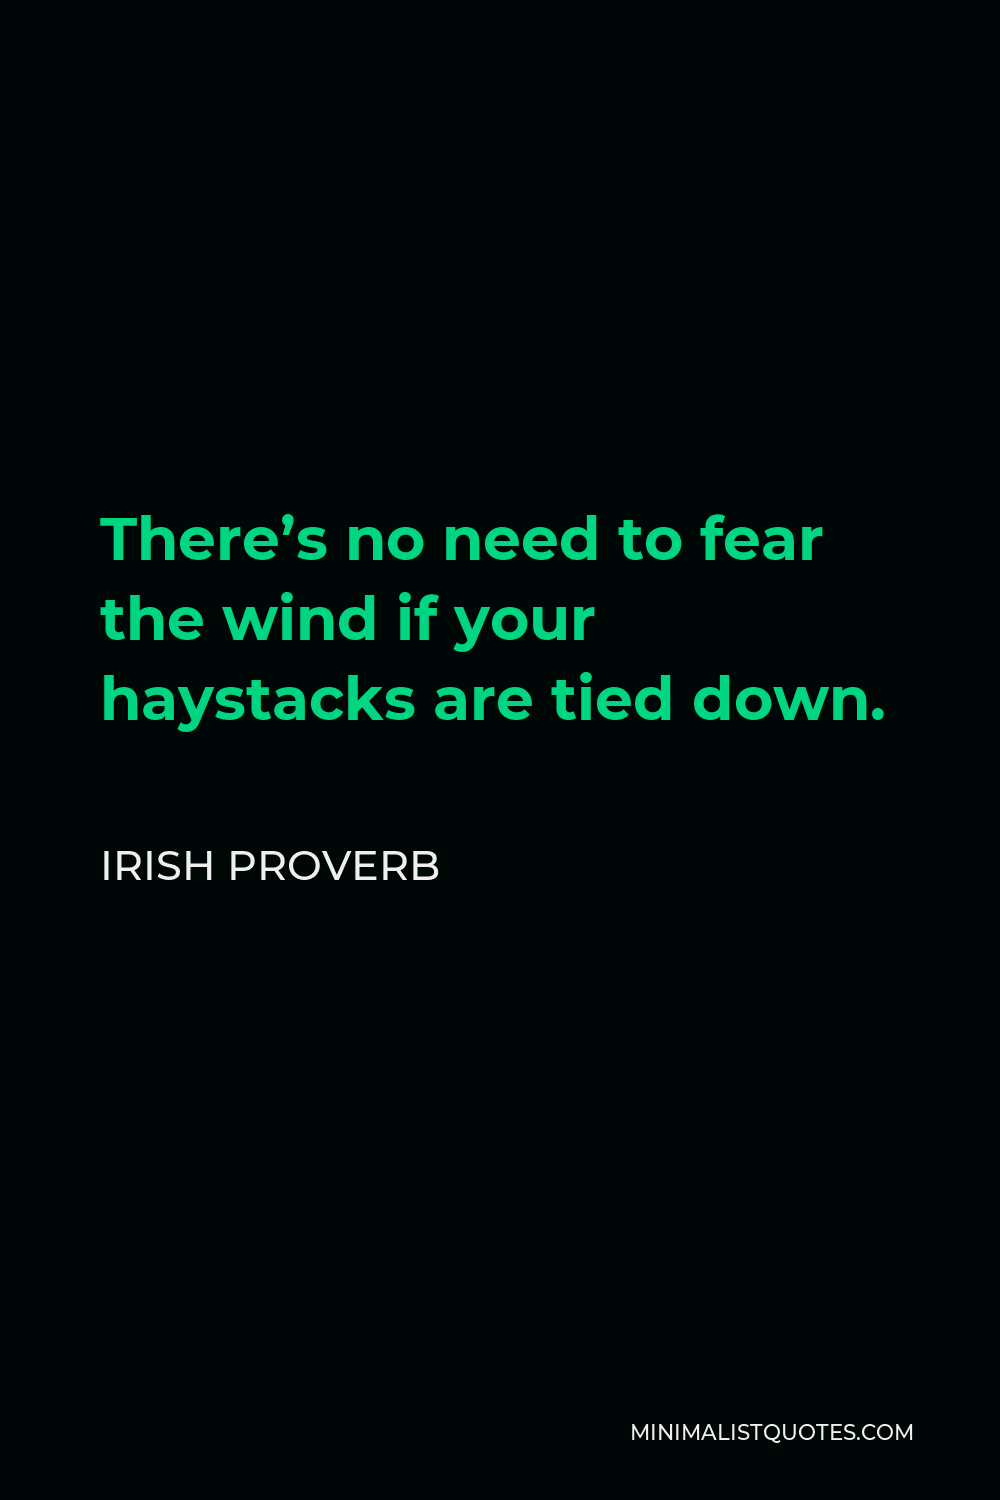 Irish Proverb Quote - There’s no need to fear the wind if your haystacks are tied down.